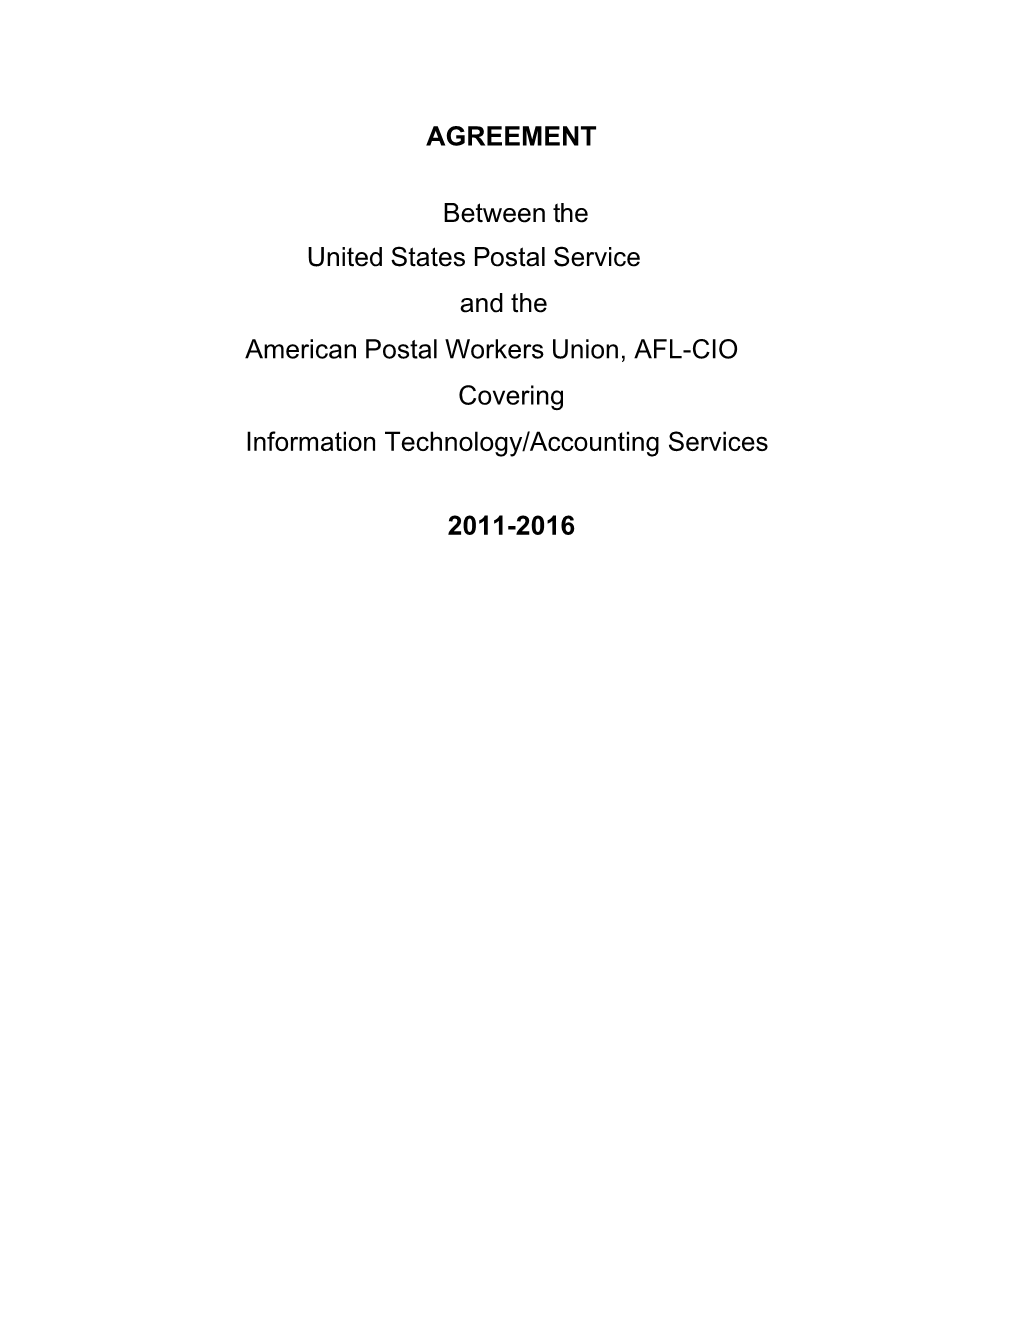 AGREEMENT Between the United States Postal Service And